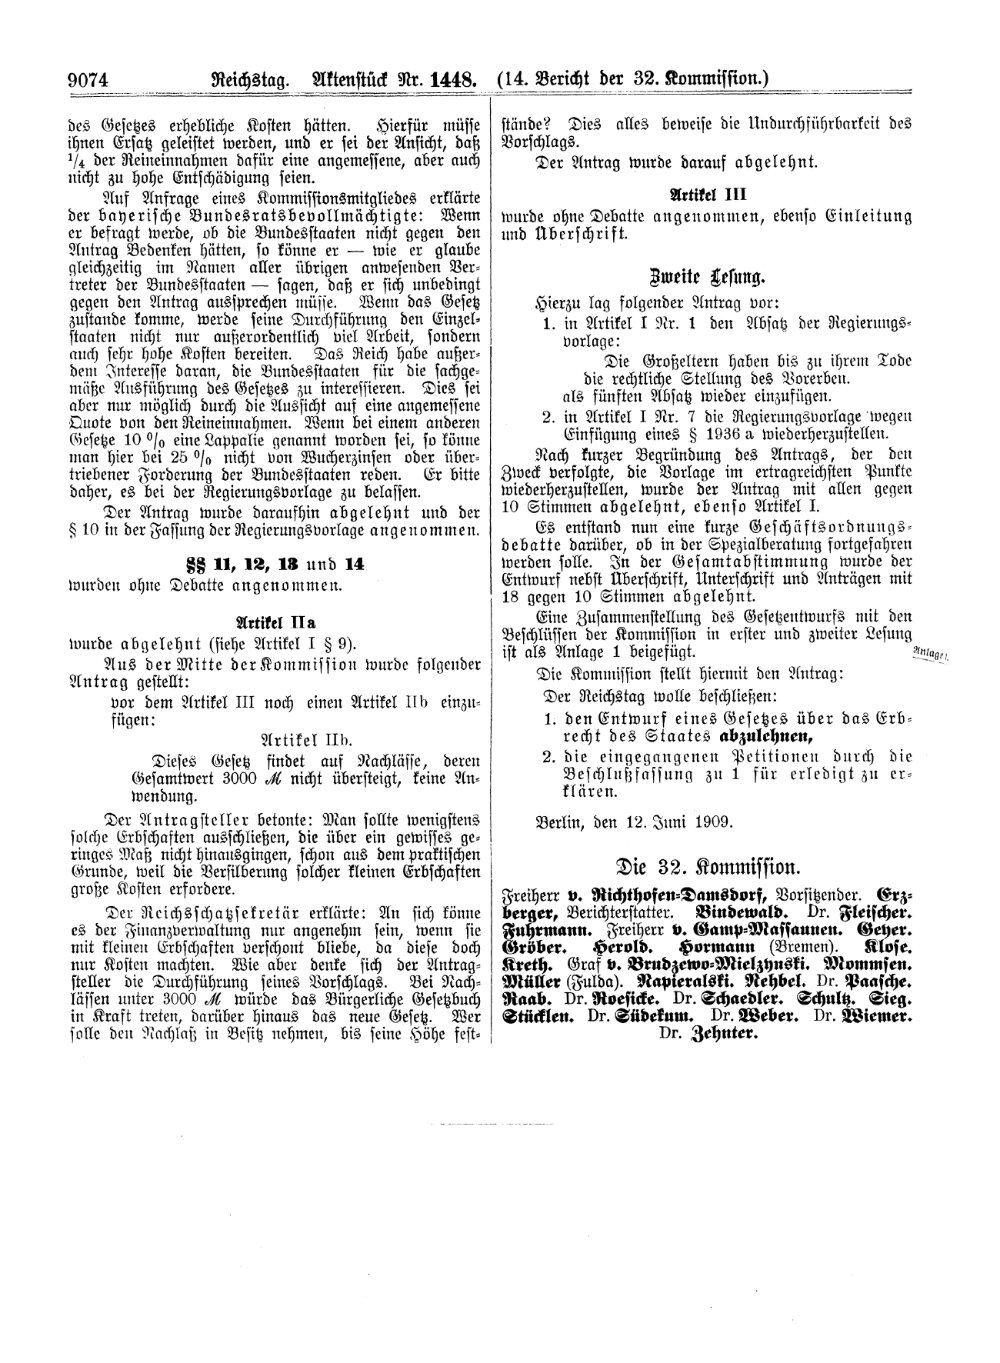 Scan of page 9074